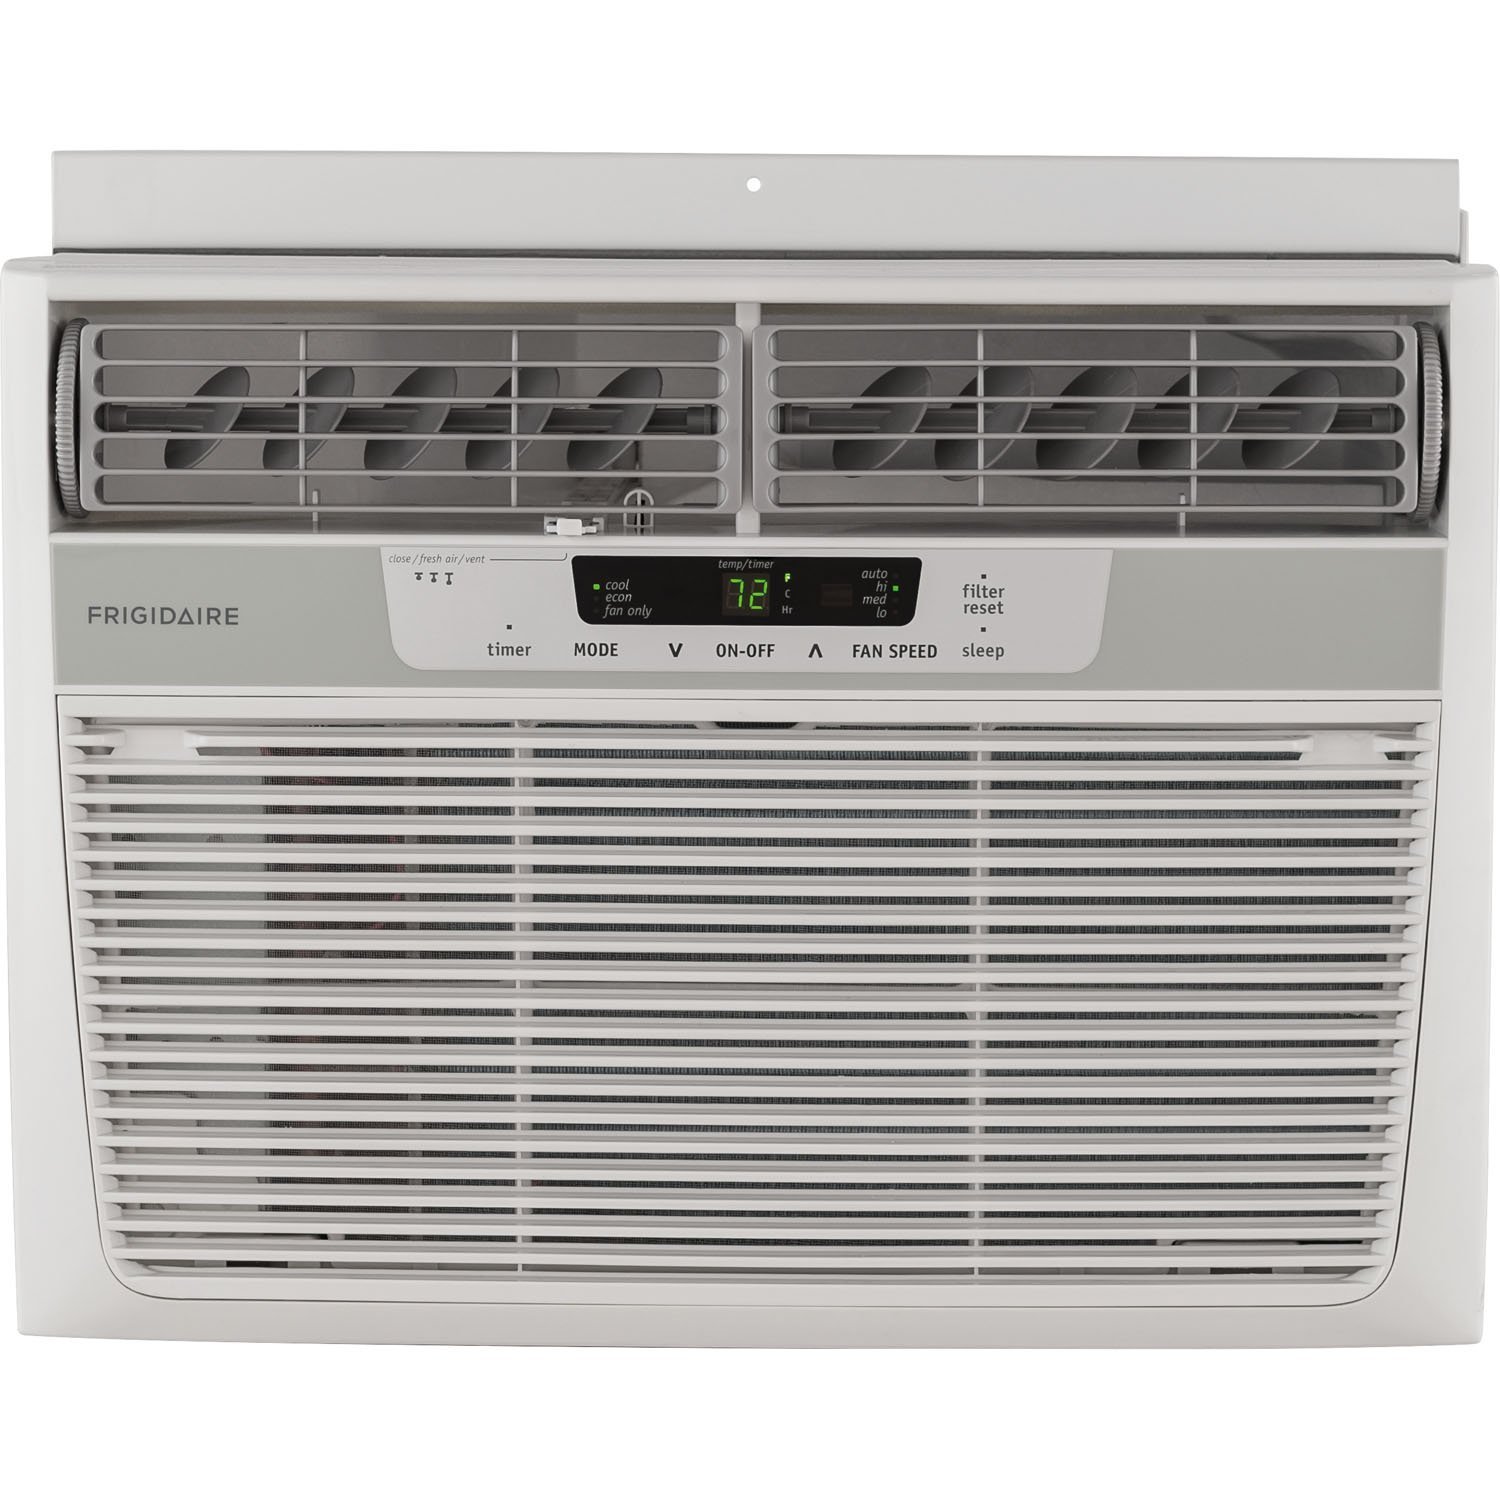 Review of Frigidaire FFRA1022R1 10000 BTU 115-volt Window-Mounted Compact Air Conditioner with Remote Control